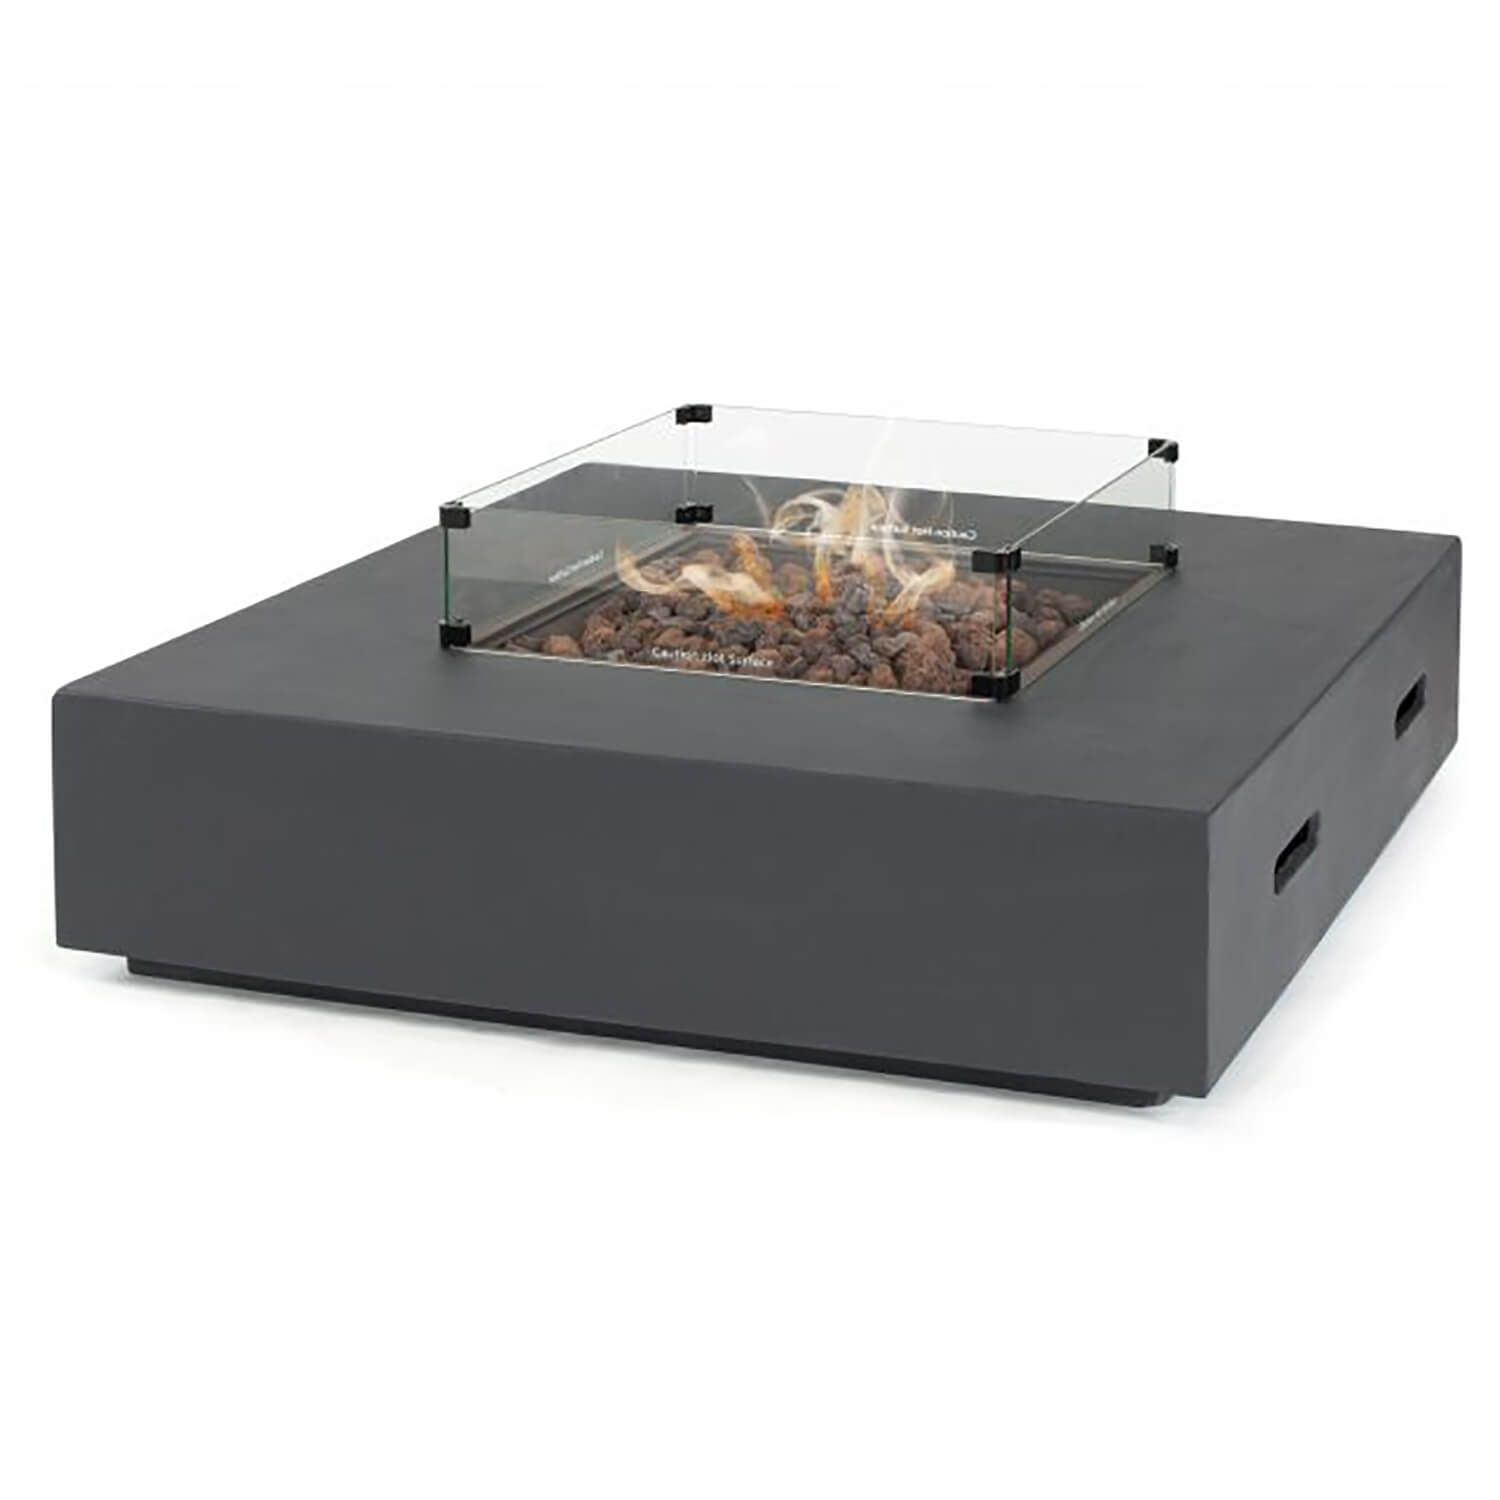 Kettler Kalos Universal Coffee Table, Gas Fire Pit Table Uk